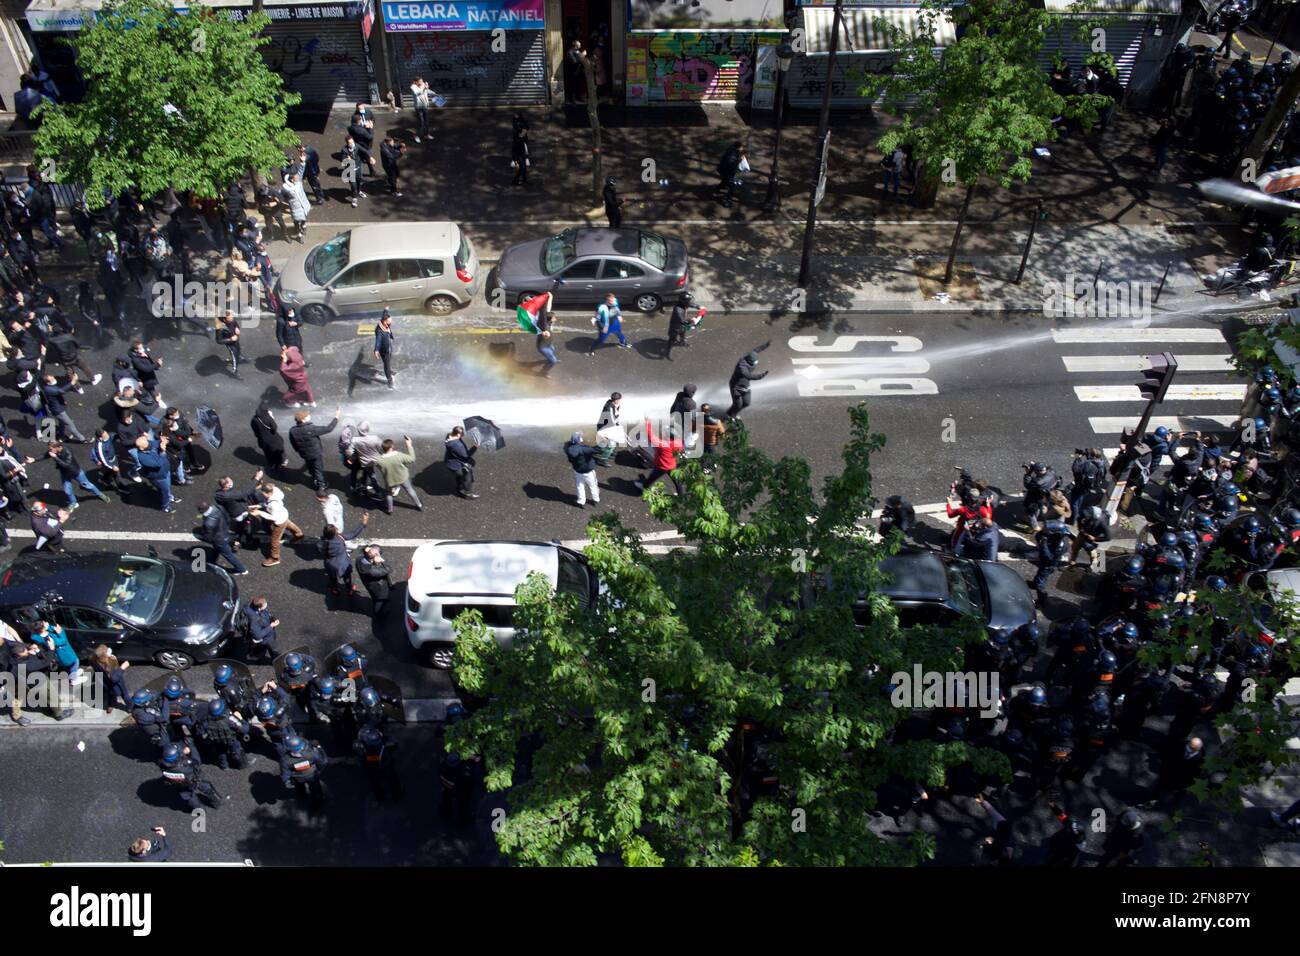 Police fire water cannon to disperse Palestine supporters gathered at Pro-Palestinian demonstration, Boulevard Barbès, Paris, France, May 15th, 2021 Stock Photo